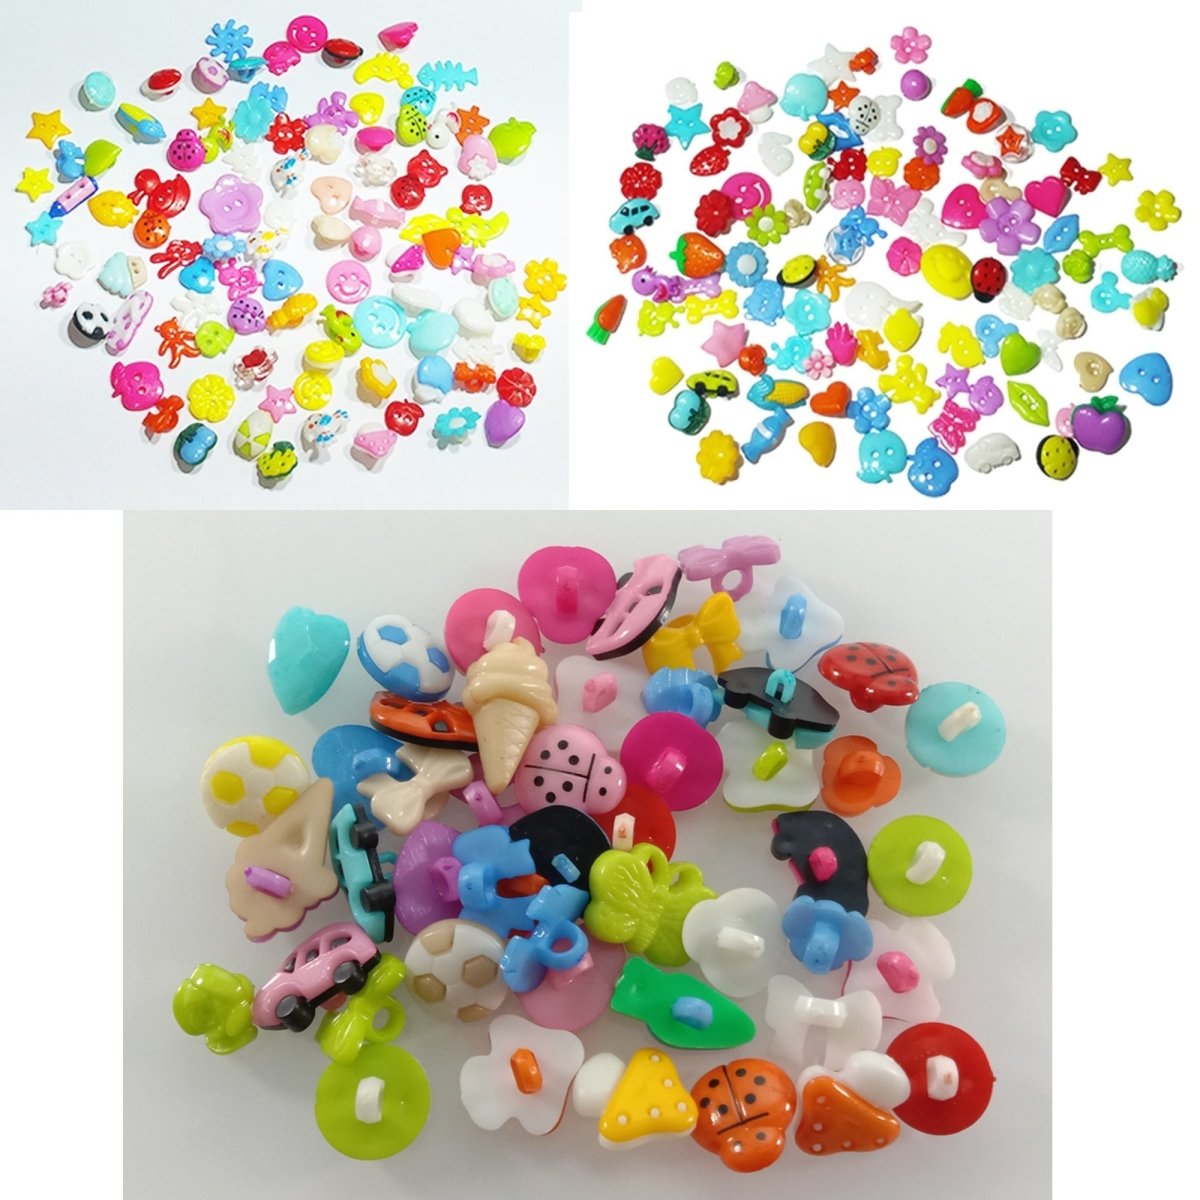 50/100pcs Mixed Shapes Buttons and Brooches for Kids Clothing Plastic Colourful Sewing - 80-100pcs Set A - - Asia Sell